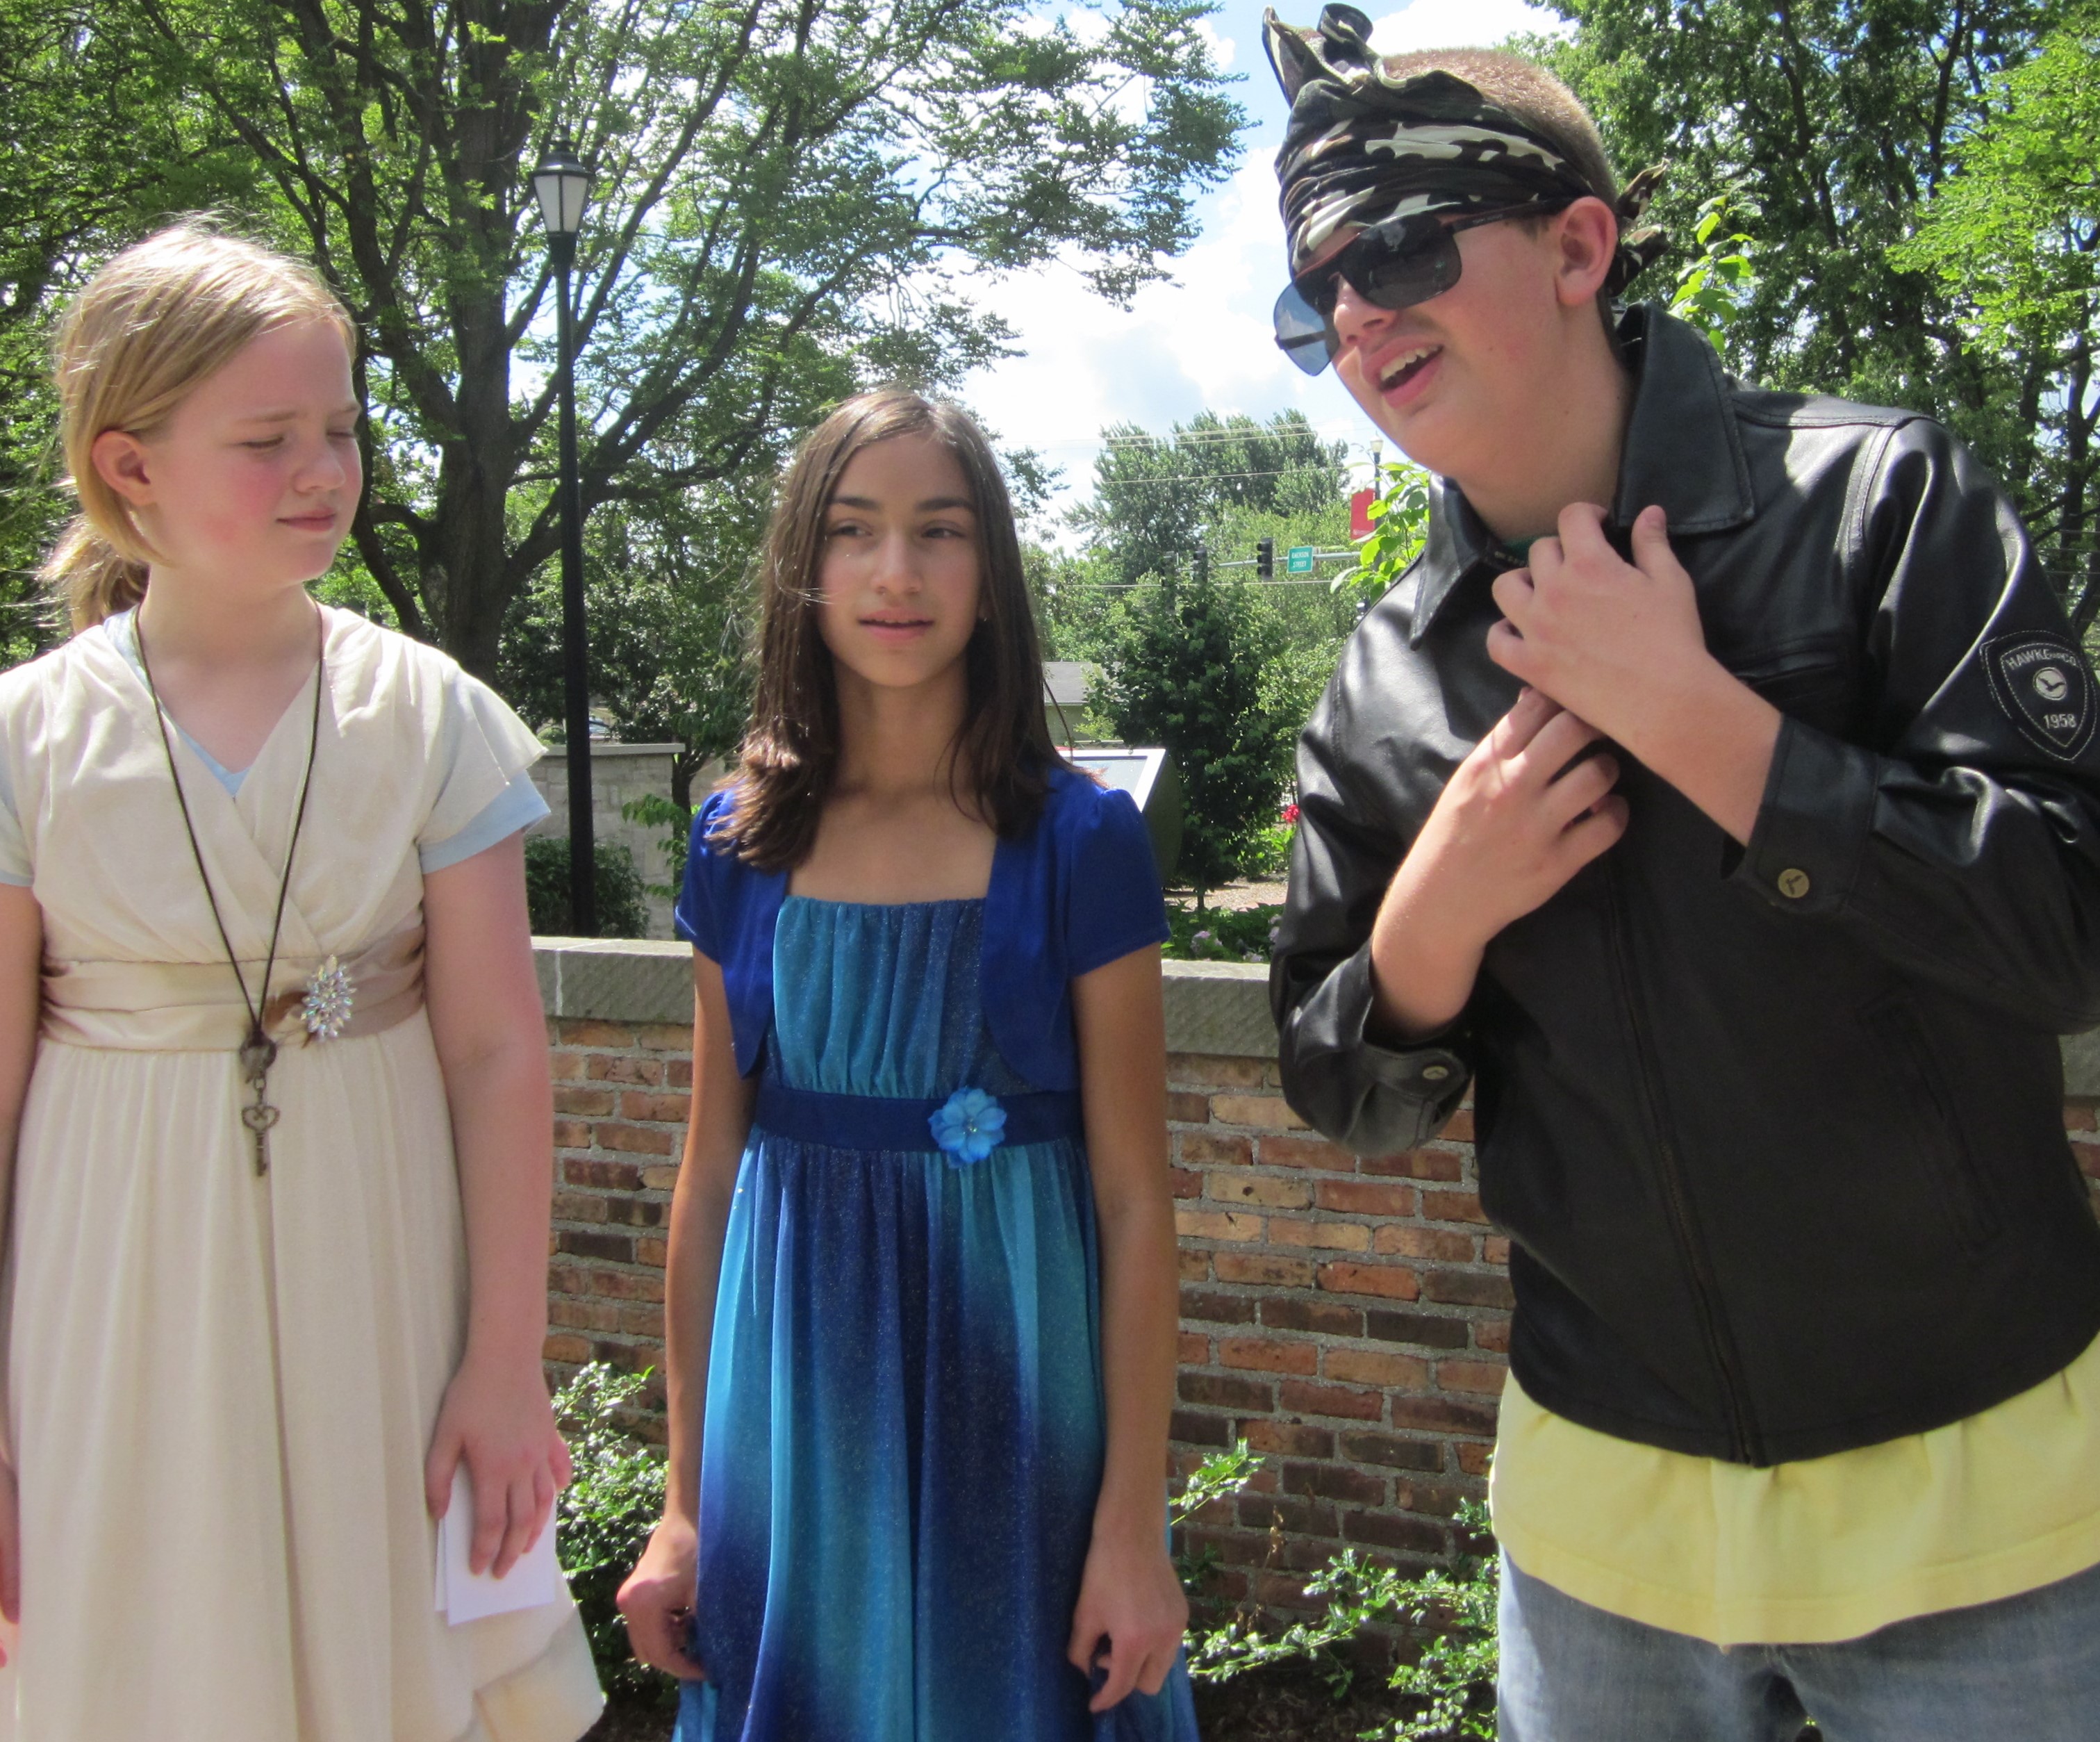 Students participate in summer programs at the Illinois Shakespeare Festival